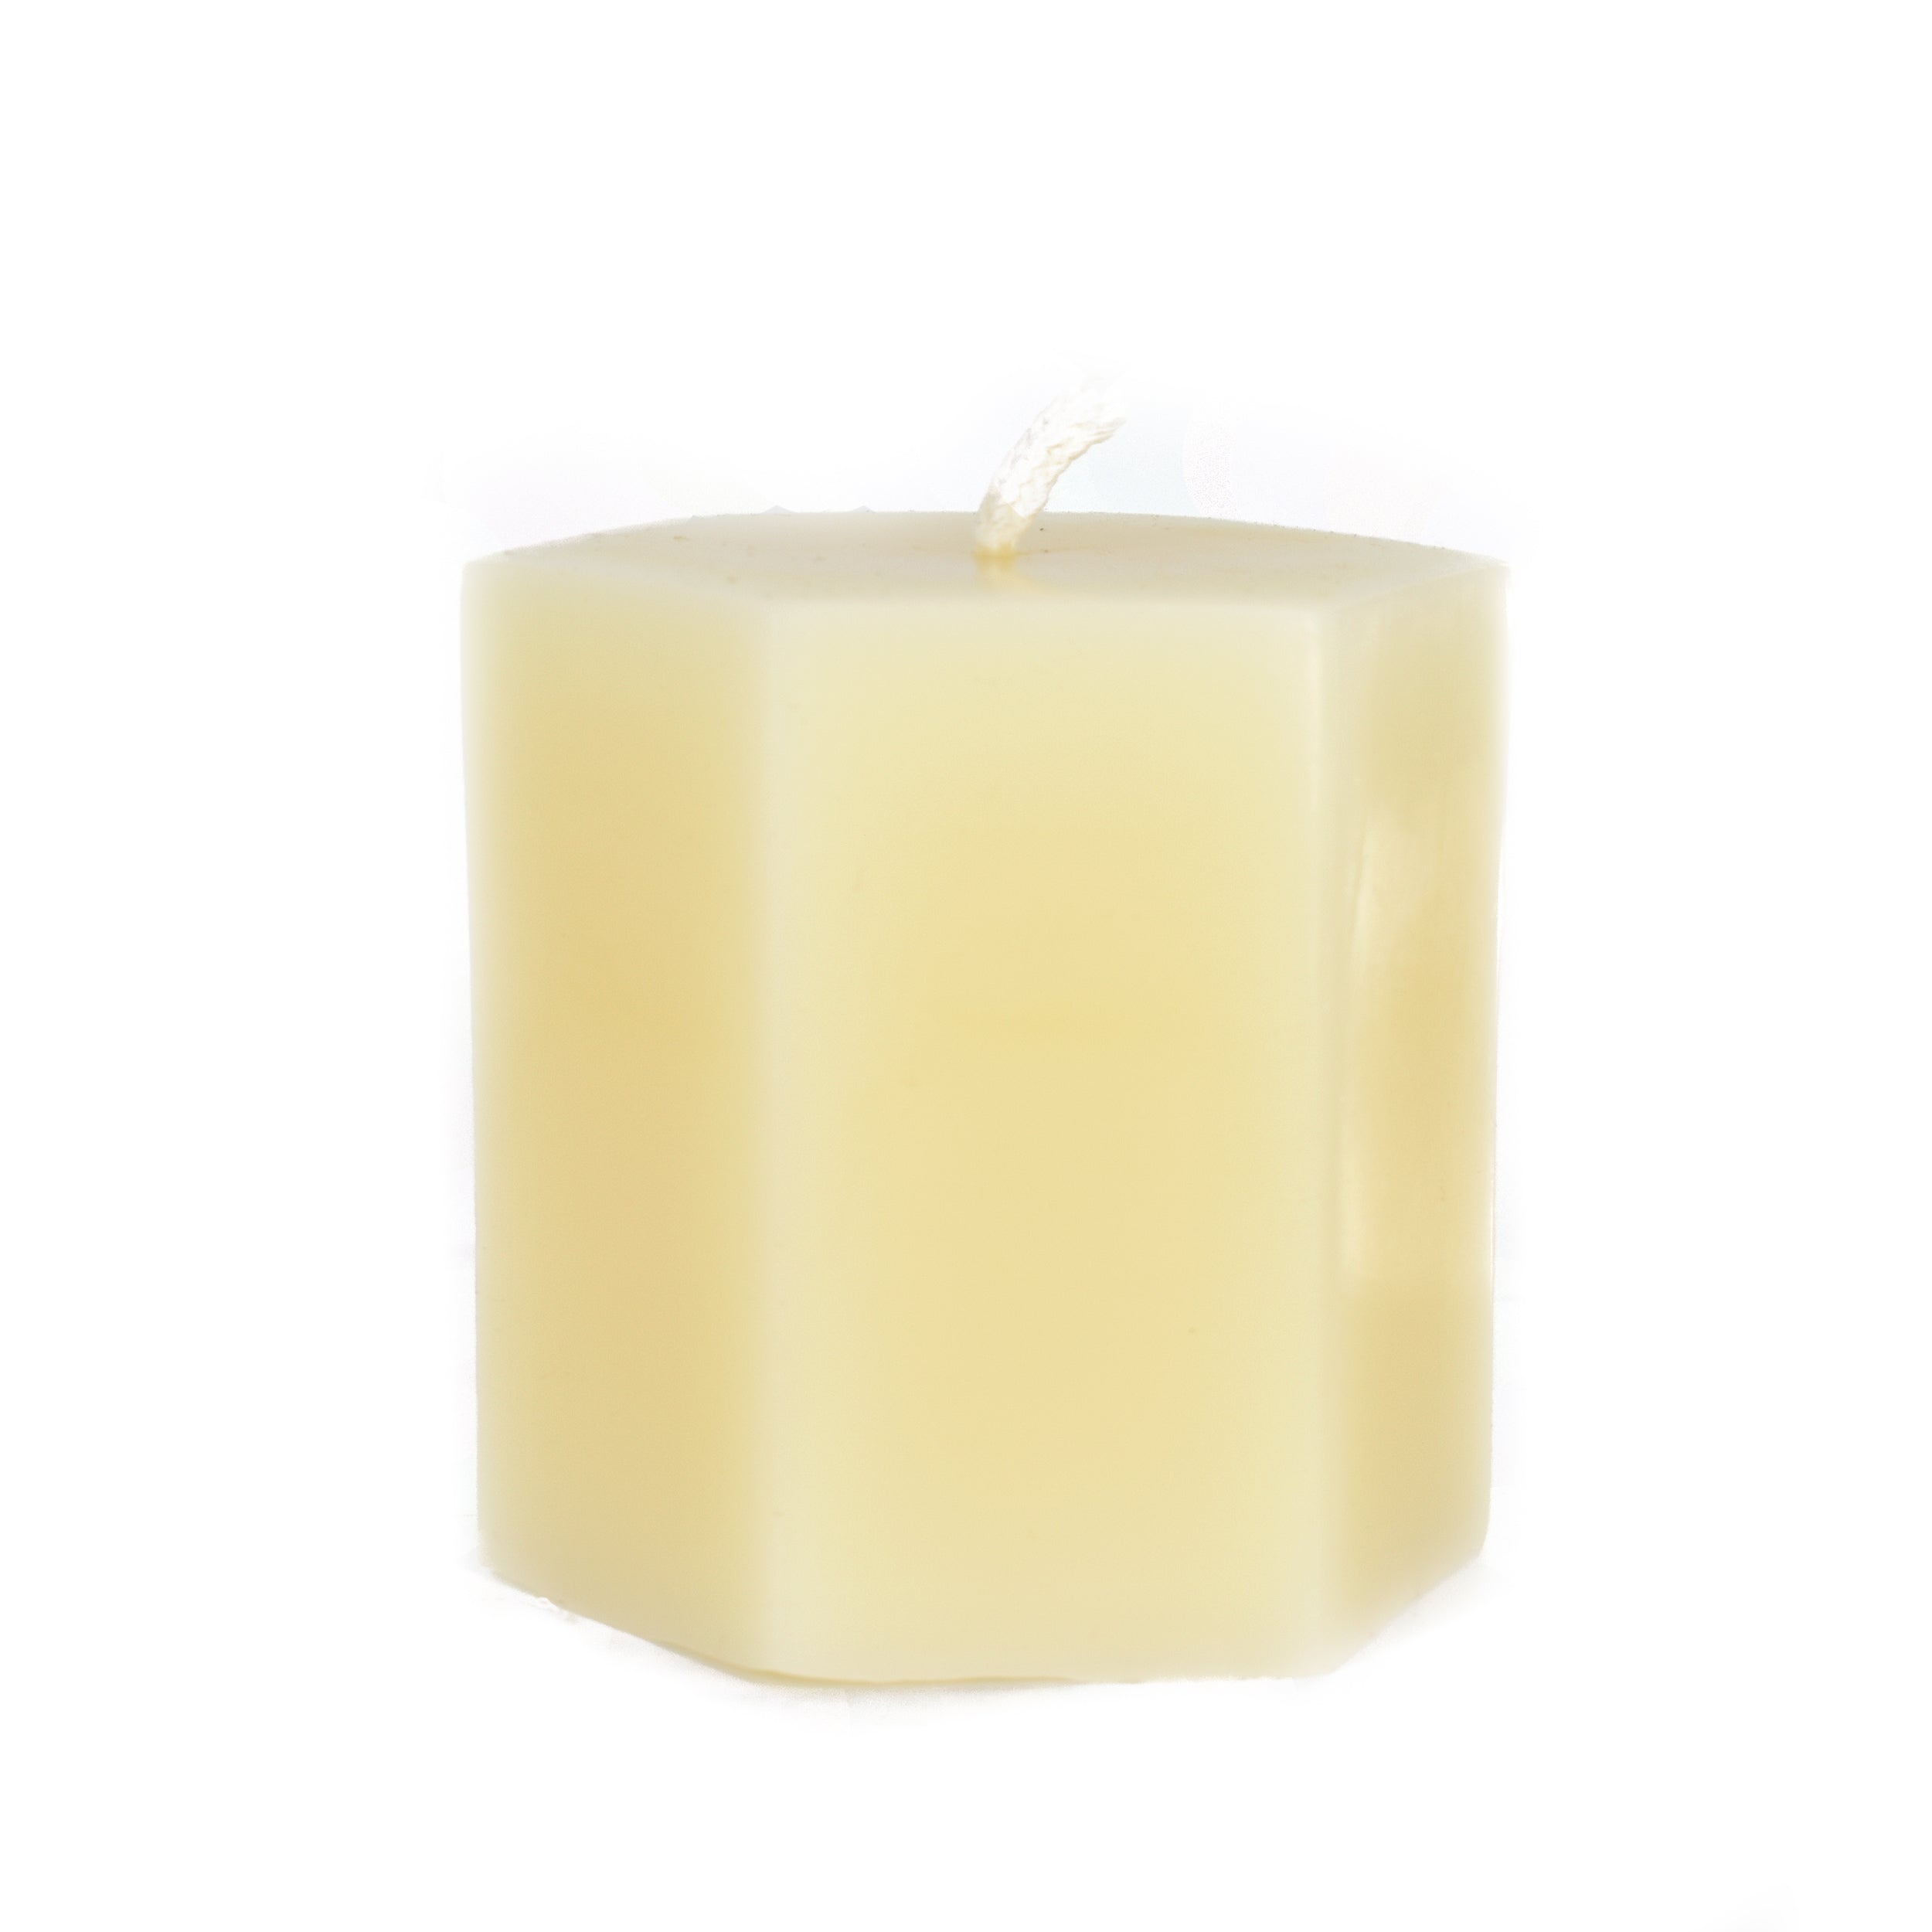 100 Percent Beeswax Votive Candles – 8 or 18 Packs